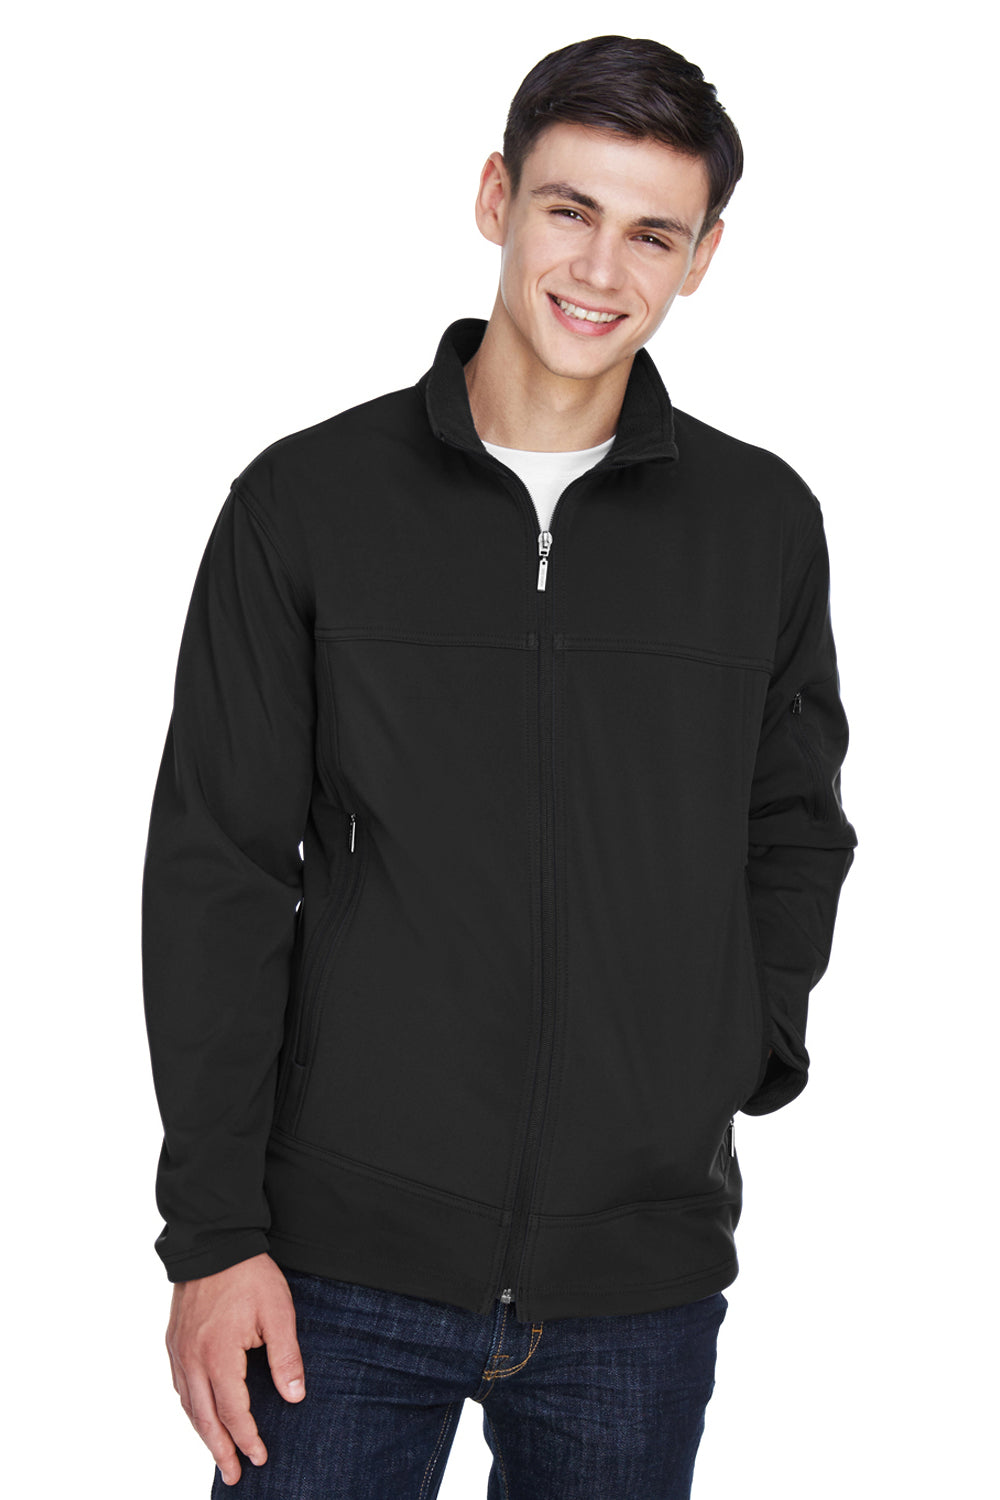 North End 88099 Mens Performance Water Resistant Full Zip Jacket Black Front